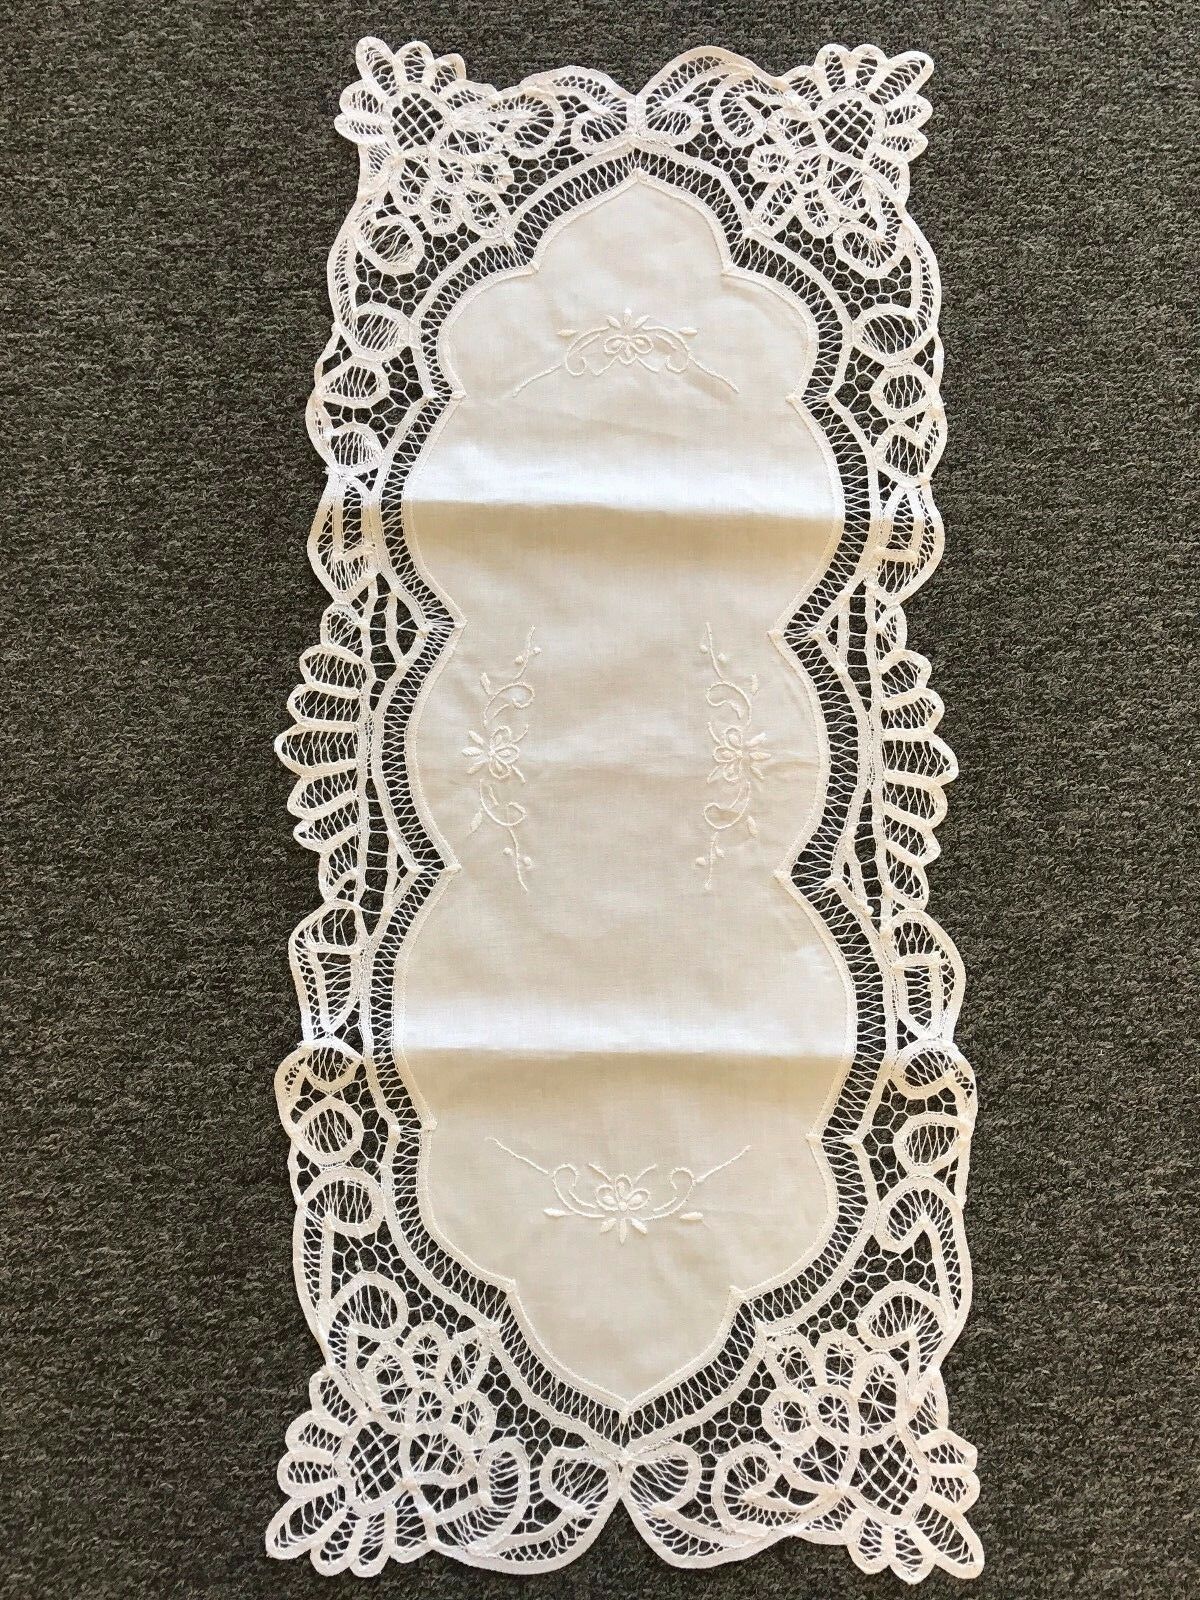 Embroidered Cotton Lace Battenburg Placemat Table Runner Wedding Party Banquet